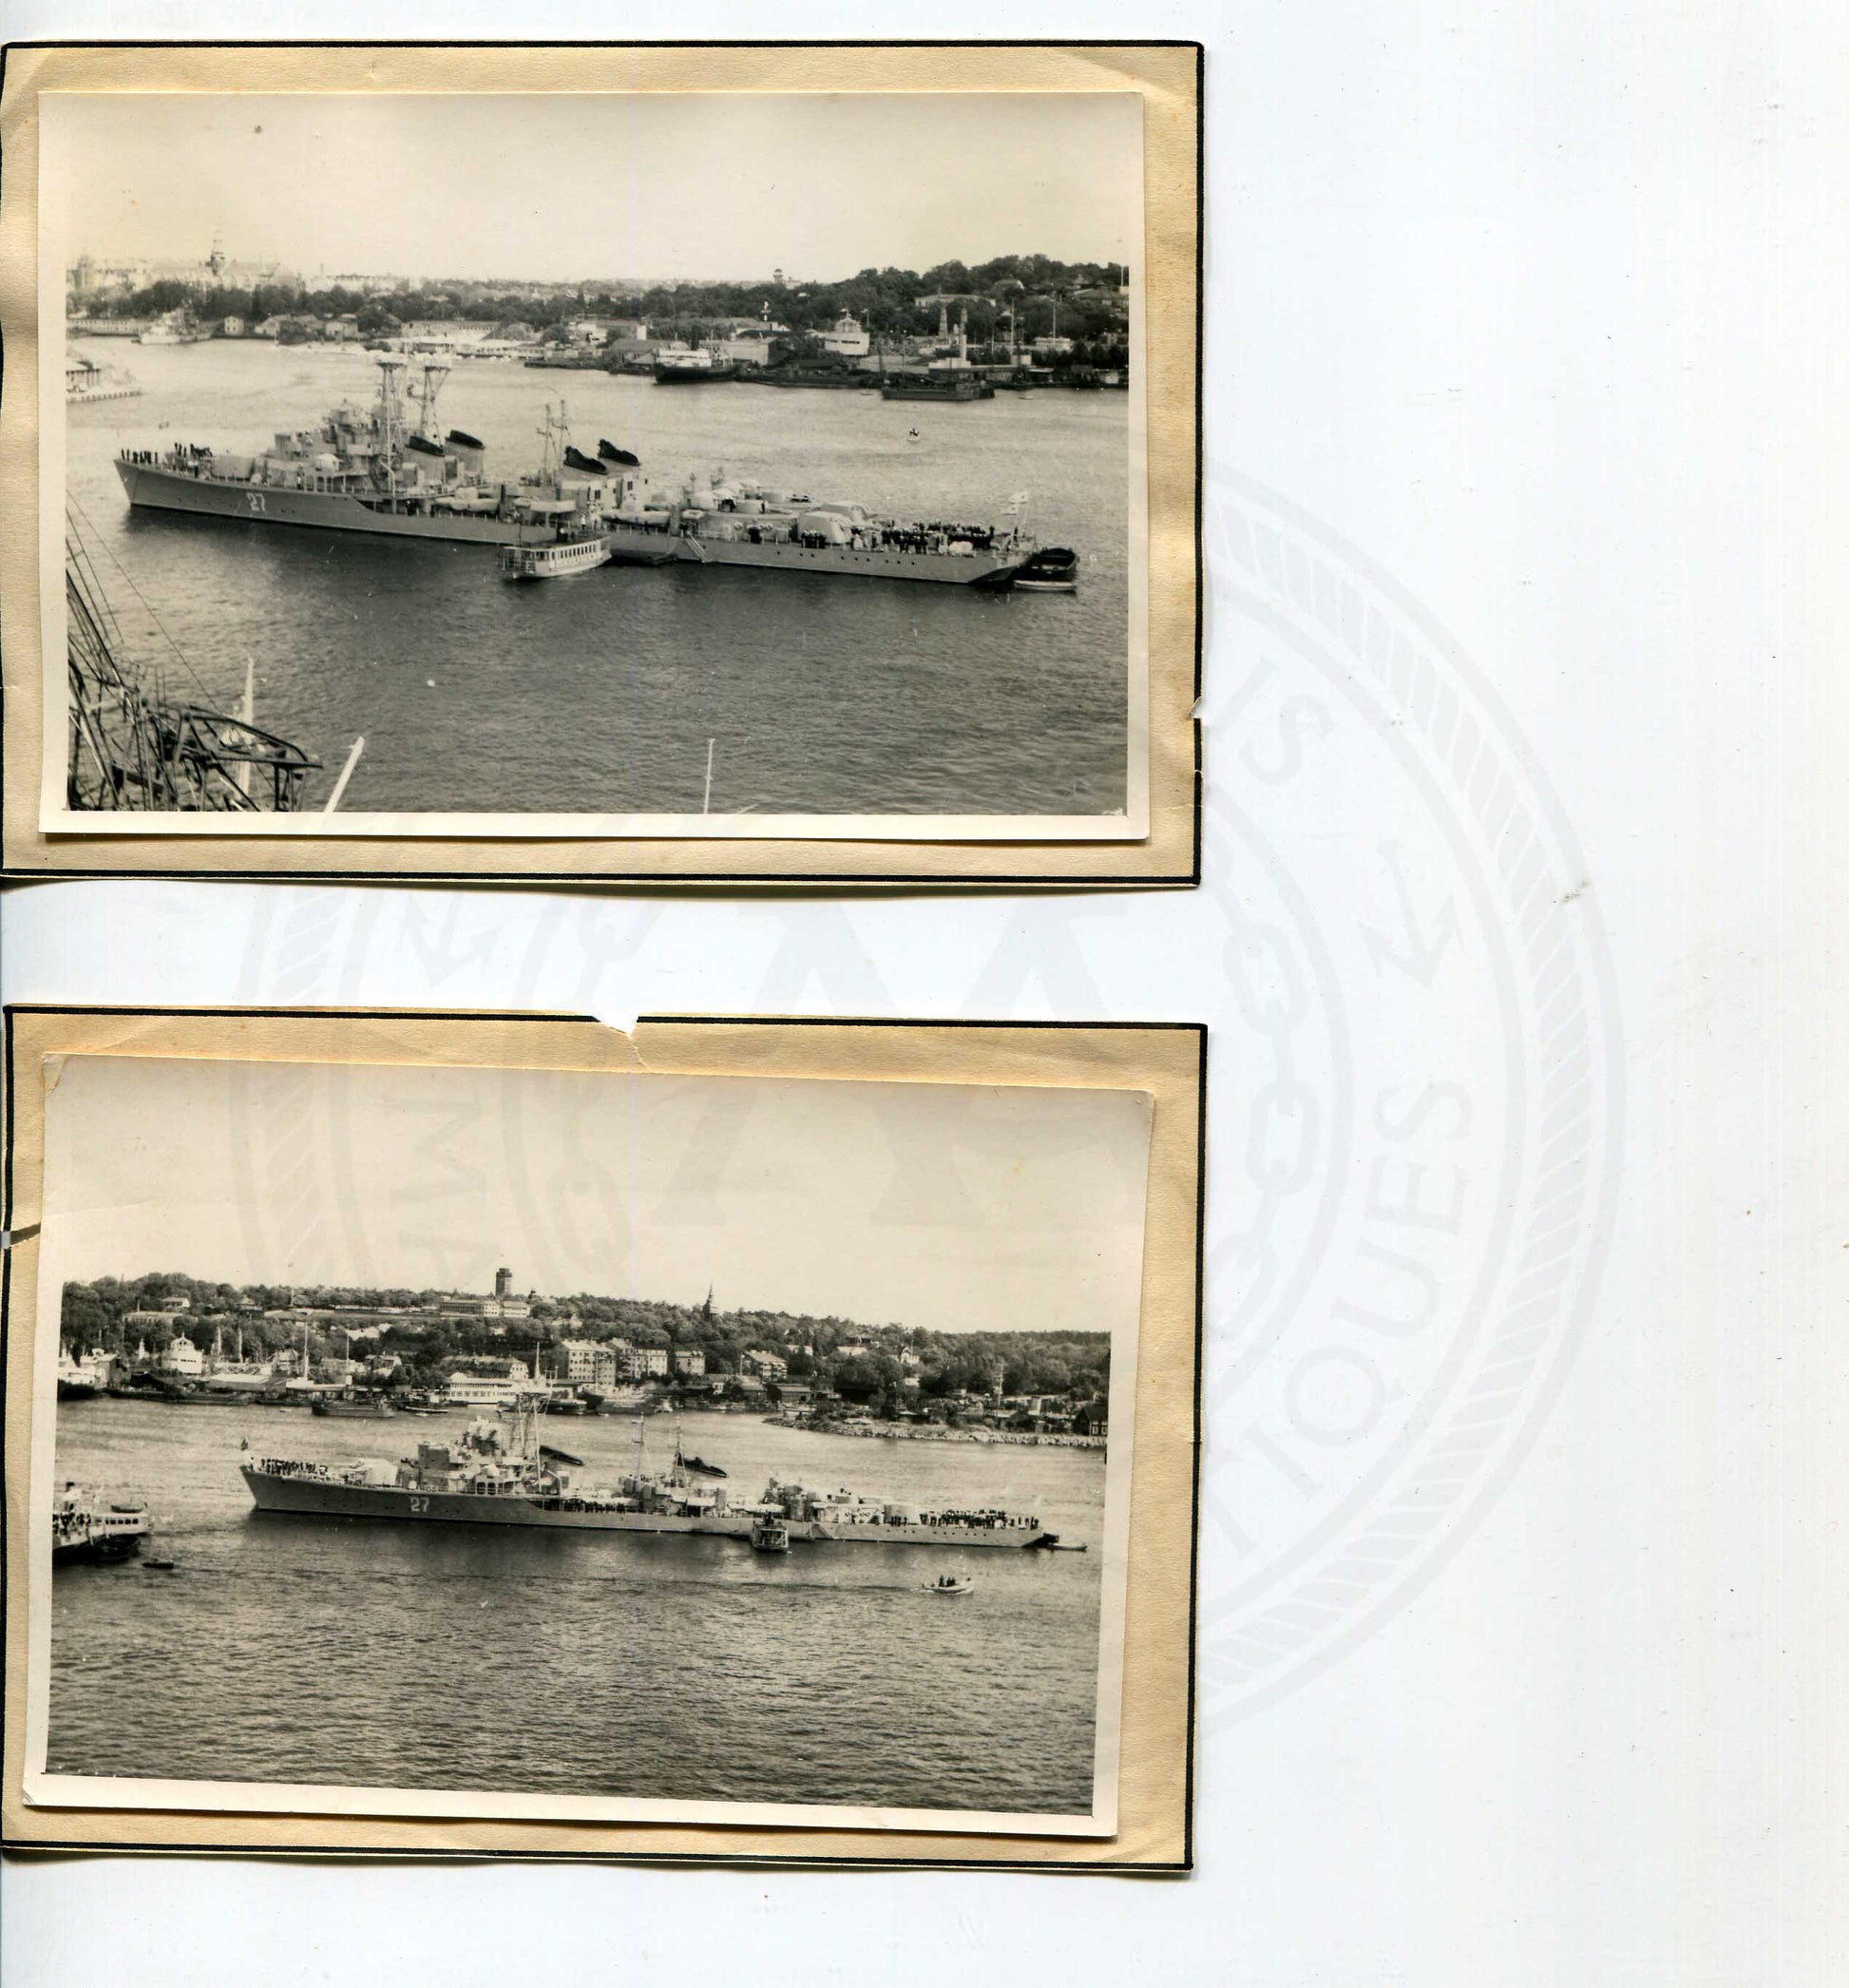 Official U.S. Navy photo of Soviet warship - Annapolis Maritime Antiques